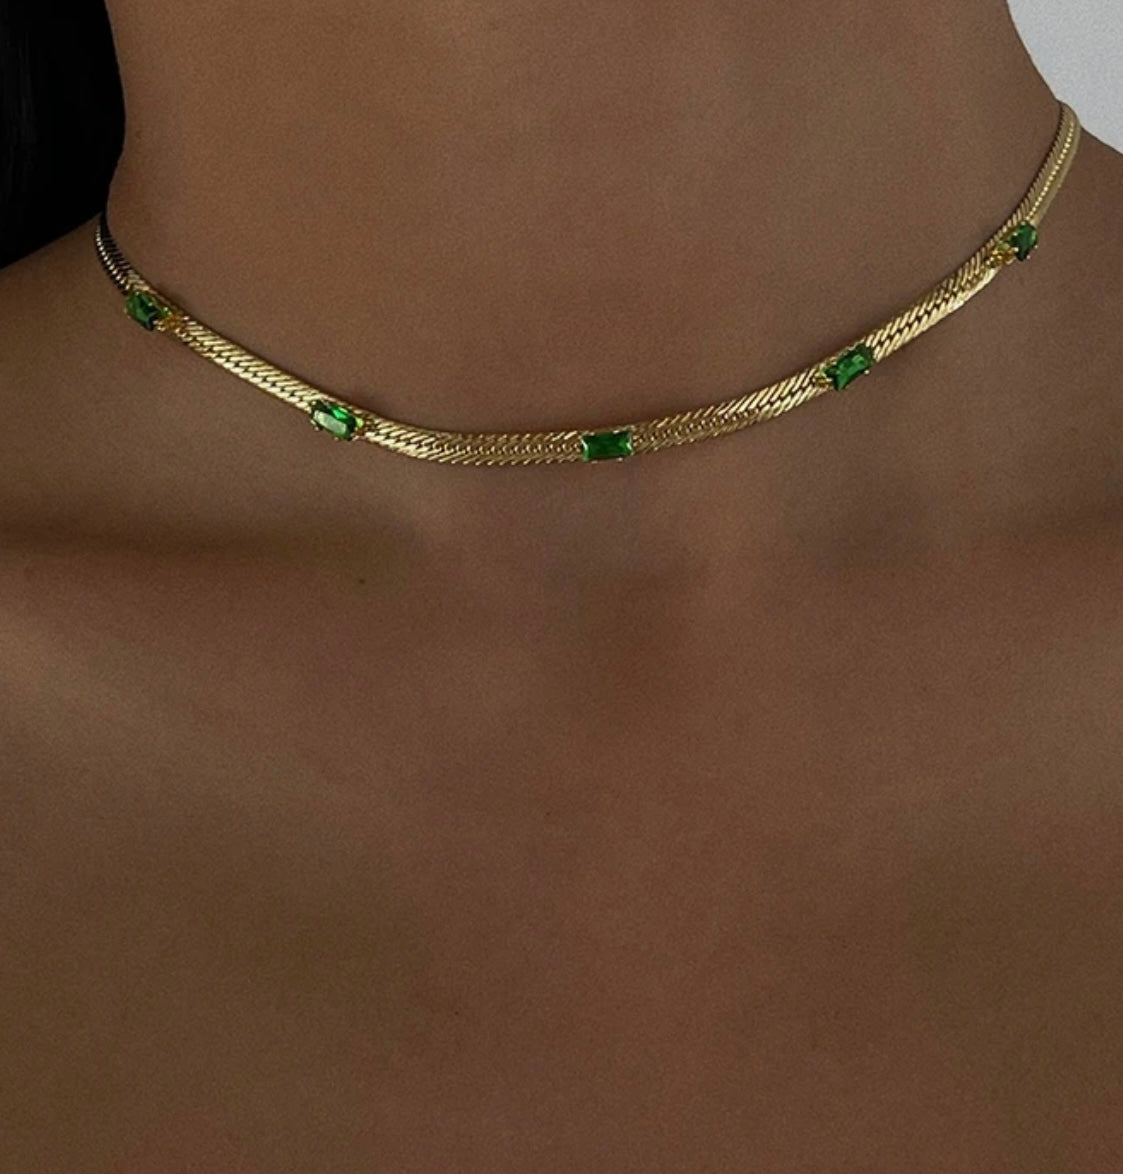 THE “EMERALD HAILEY” NECKLACE